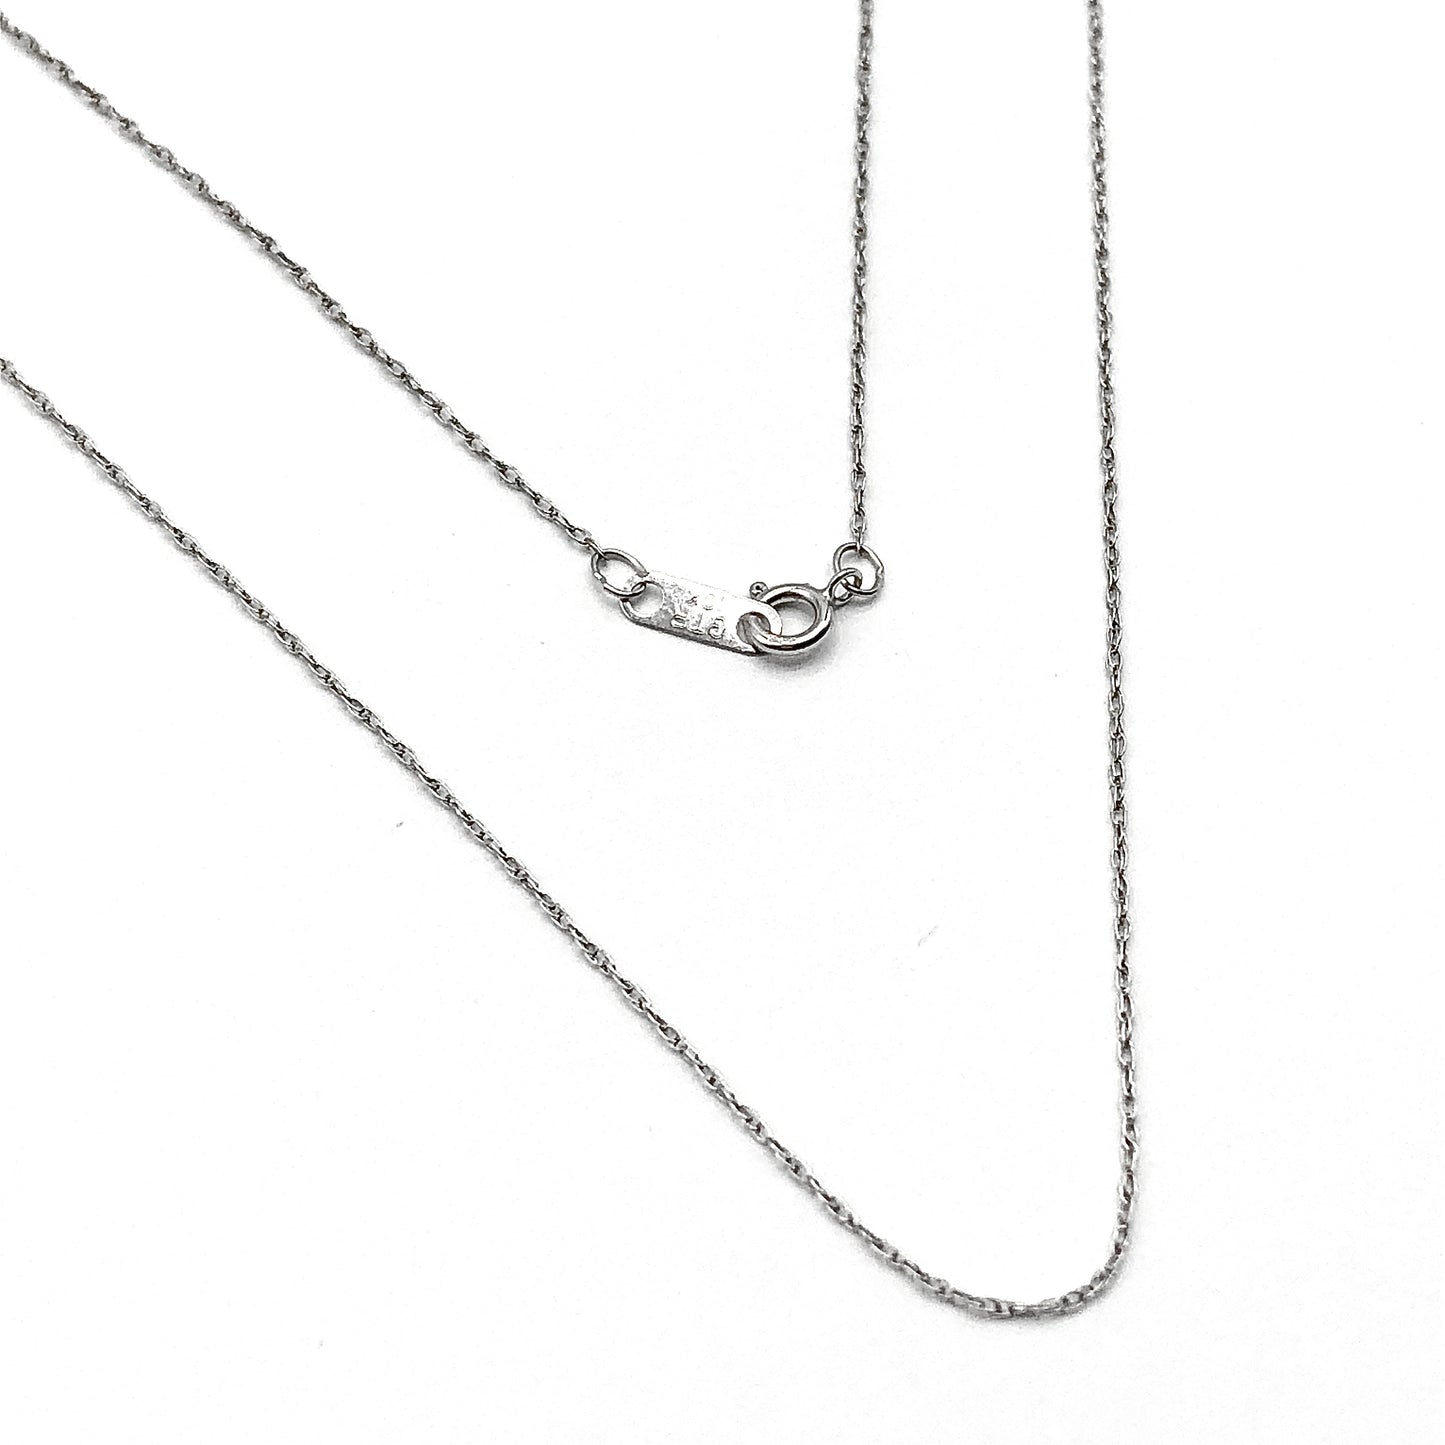 Necklace - Womens 10k White Gold 18in Delicate Thin Chain Necklace - Genuine Solid Gold and in the USA!